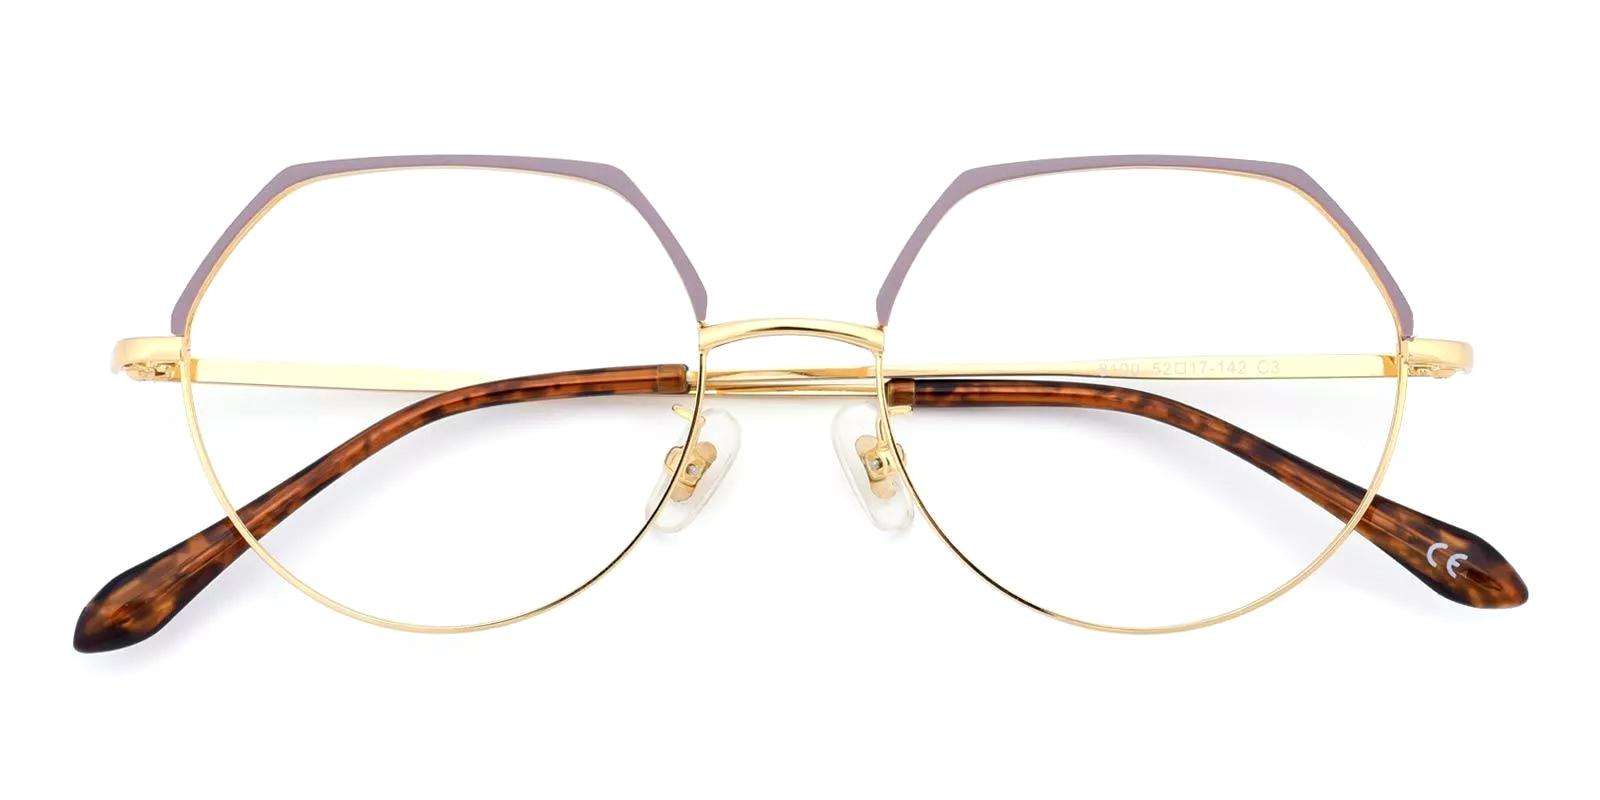 Actie Purple Metal Eyeglasses , NosePads Frames from ABBE Glasses